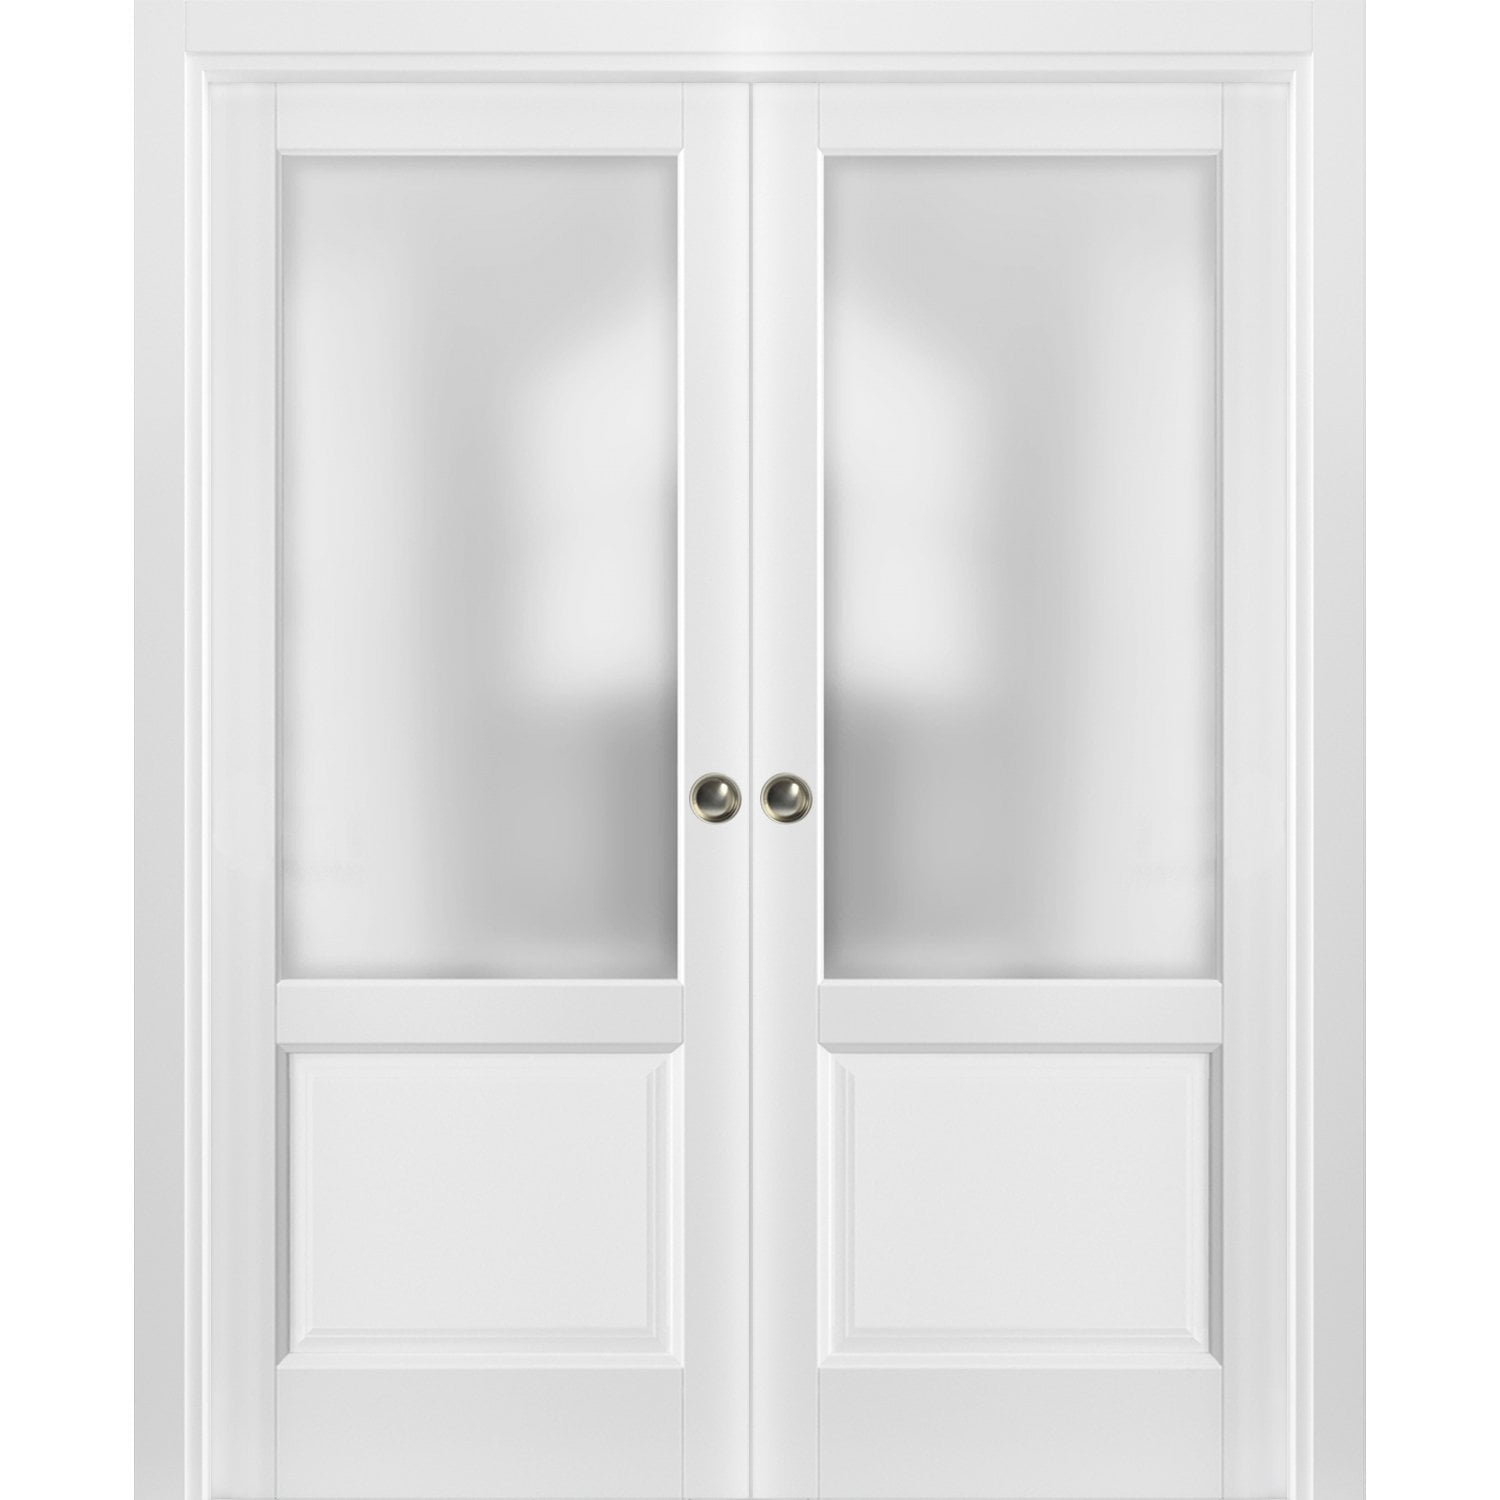 French Double Pocket Doors 56 x 80 with Frames - Walmart.com